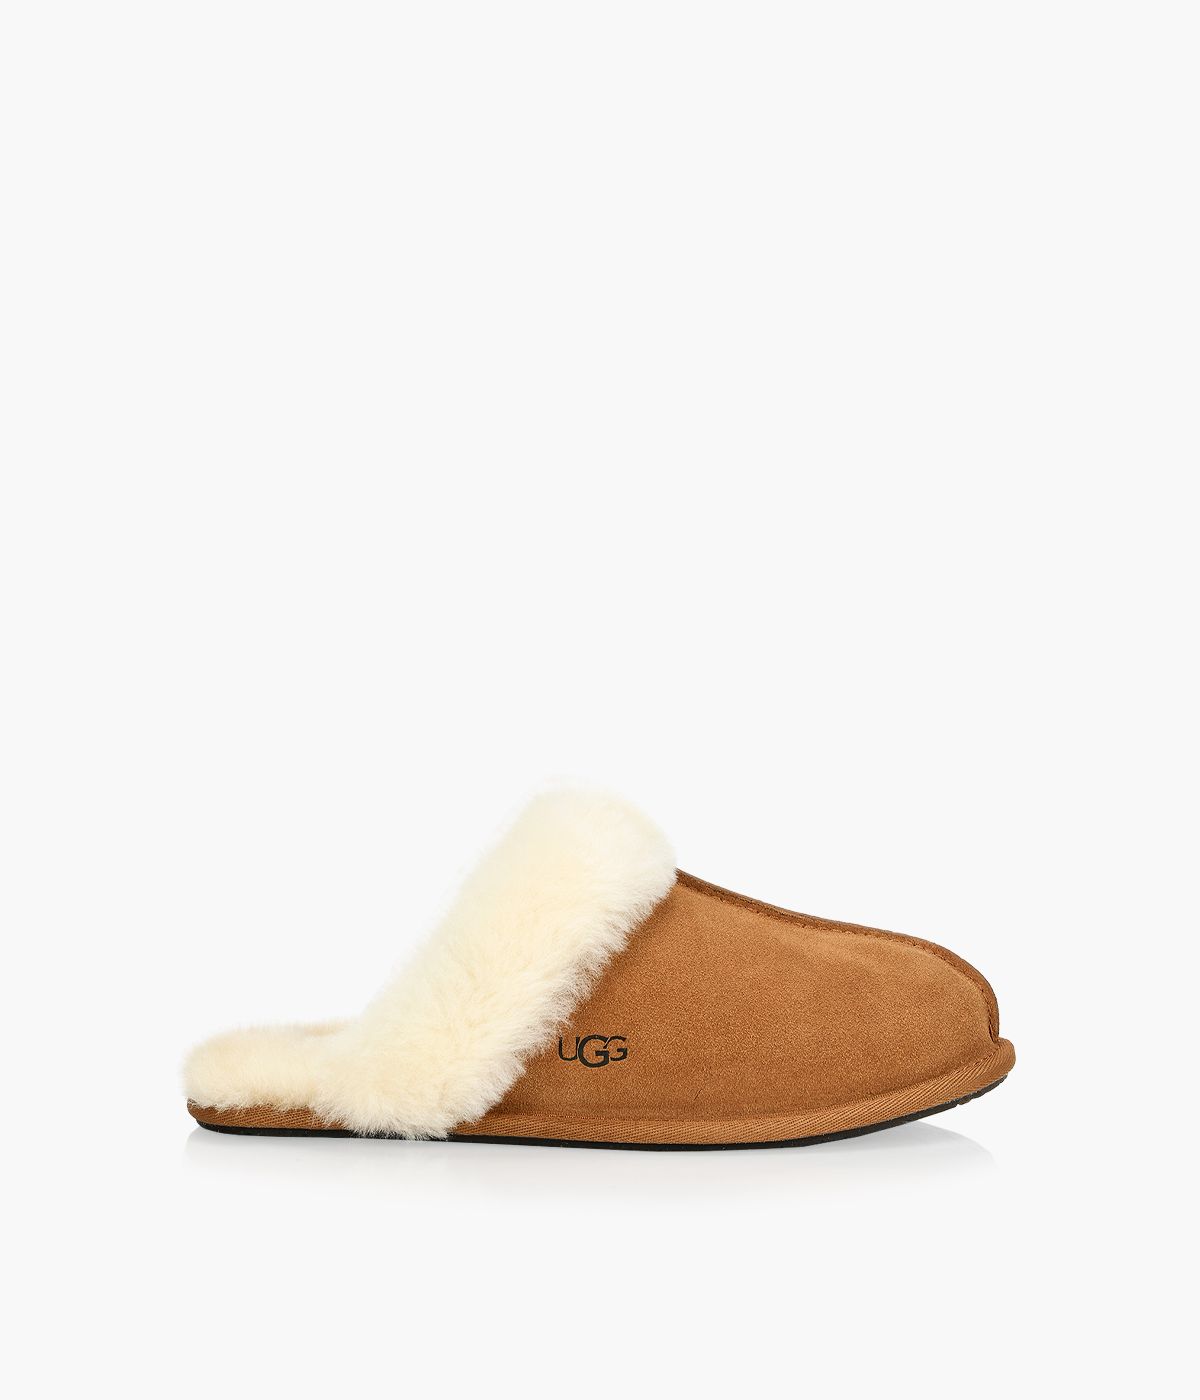 UGG SCUFFETTE | BrownsShoes | Browns Shoes